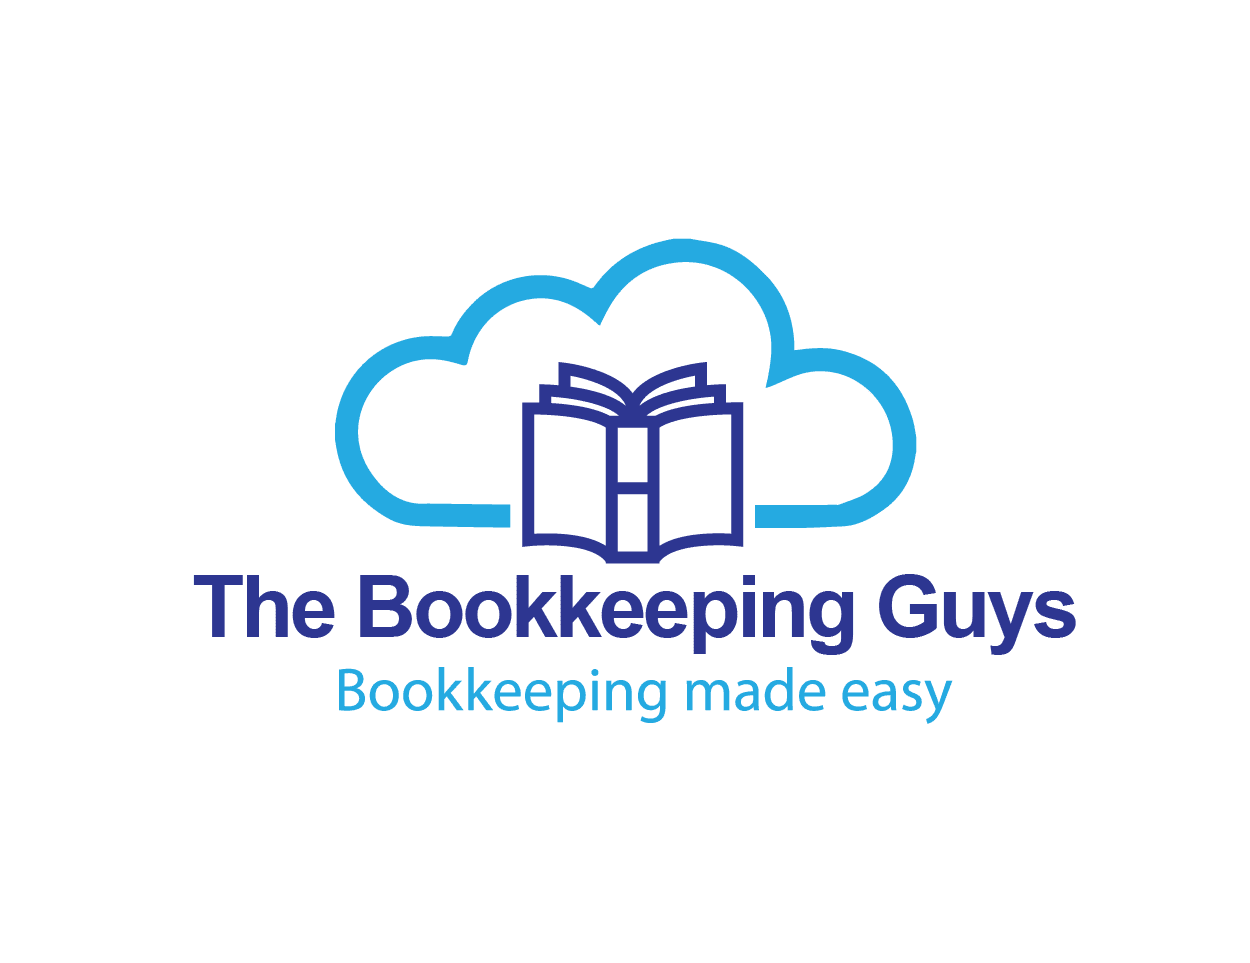 The Bookkeeping Guys